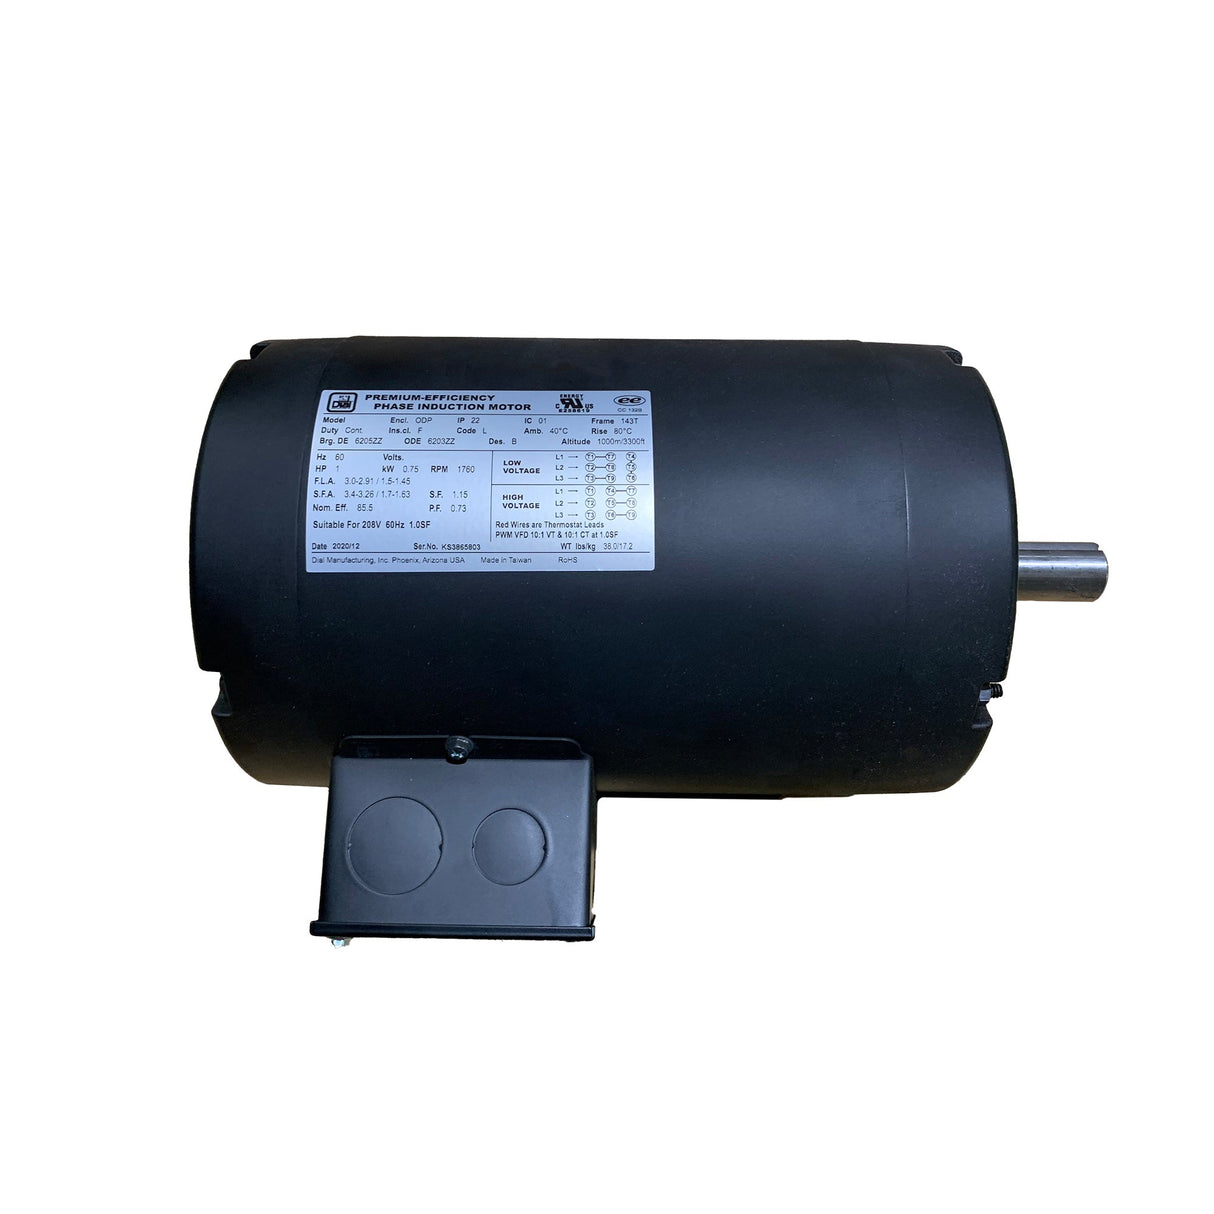 Dial Manufacturing 230/460V 1½ HP 3 Phase Industrial Motor